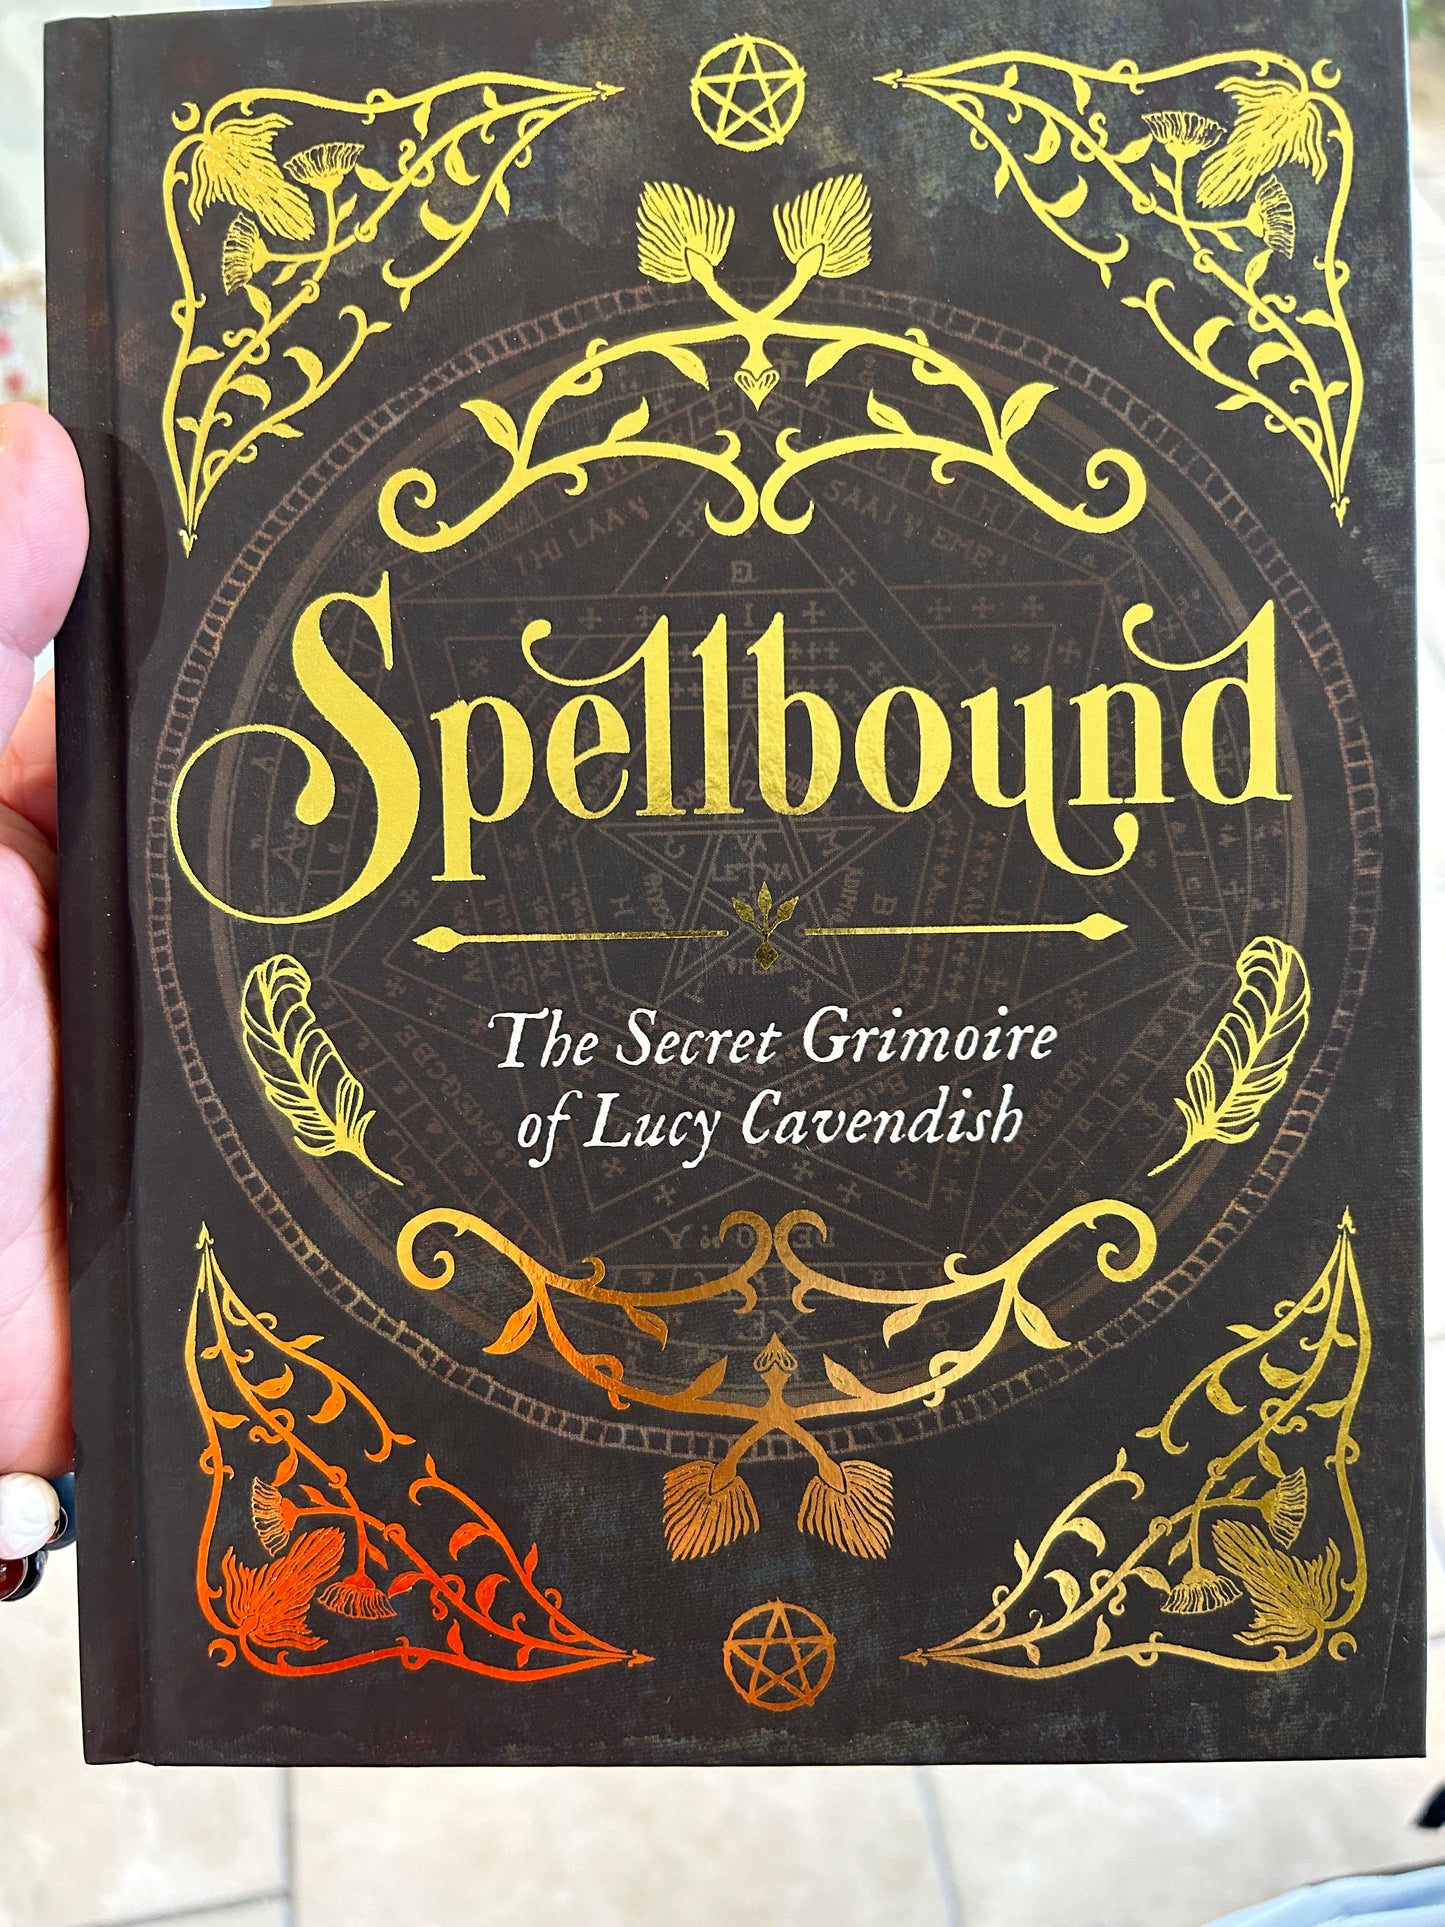 spellbound by Lucy Cavendish